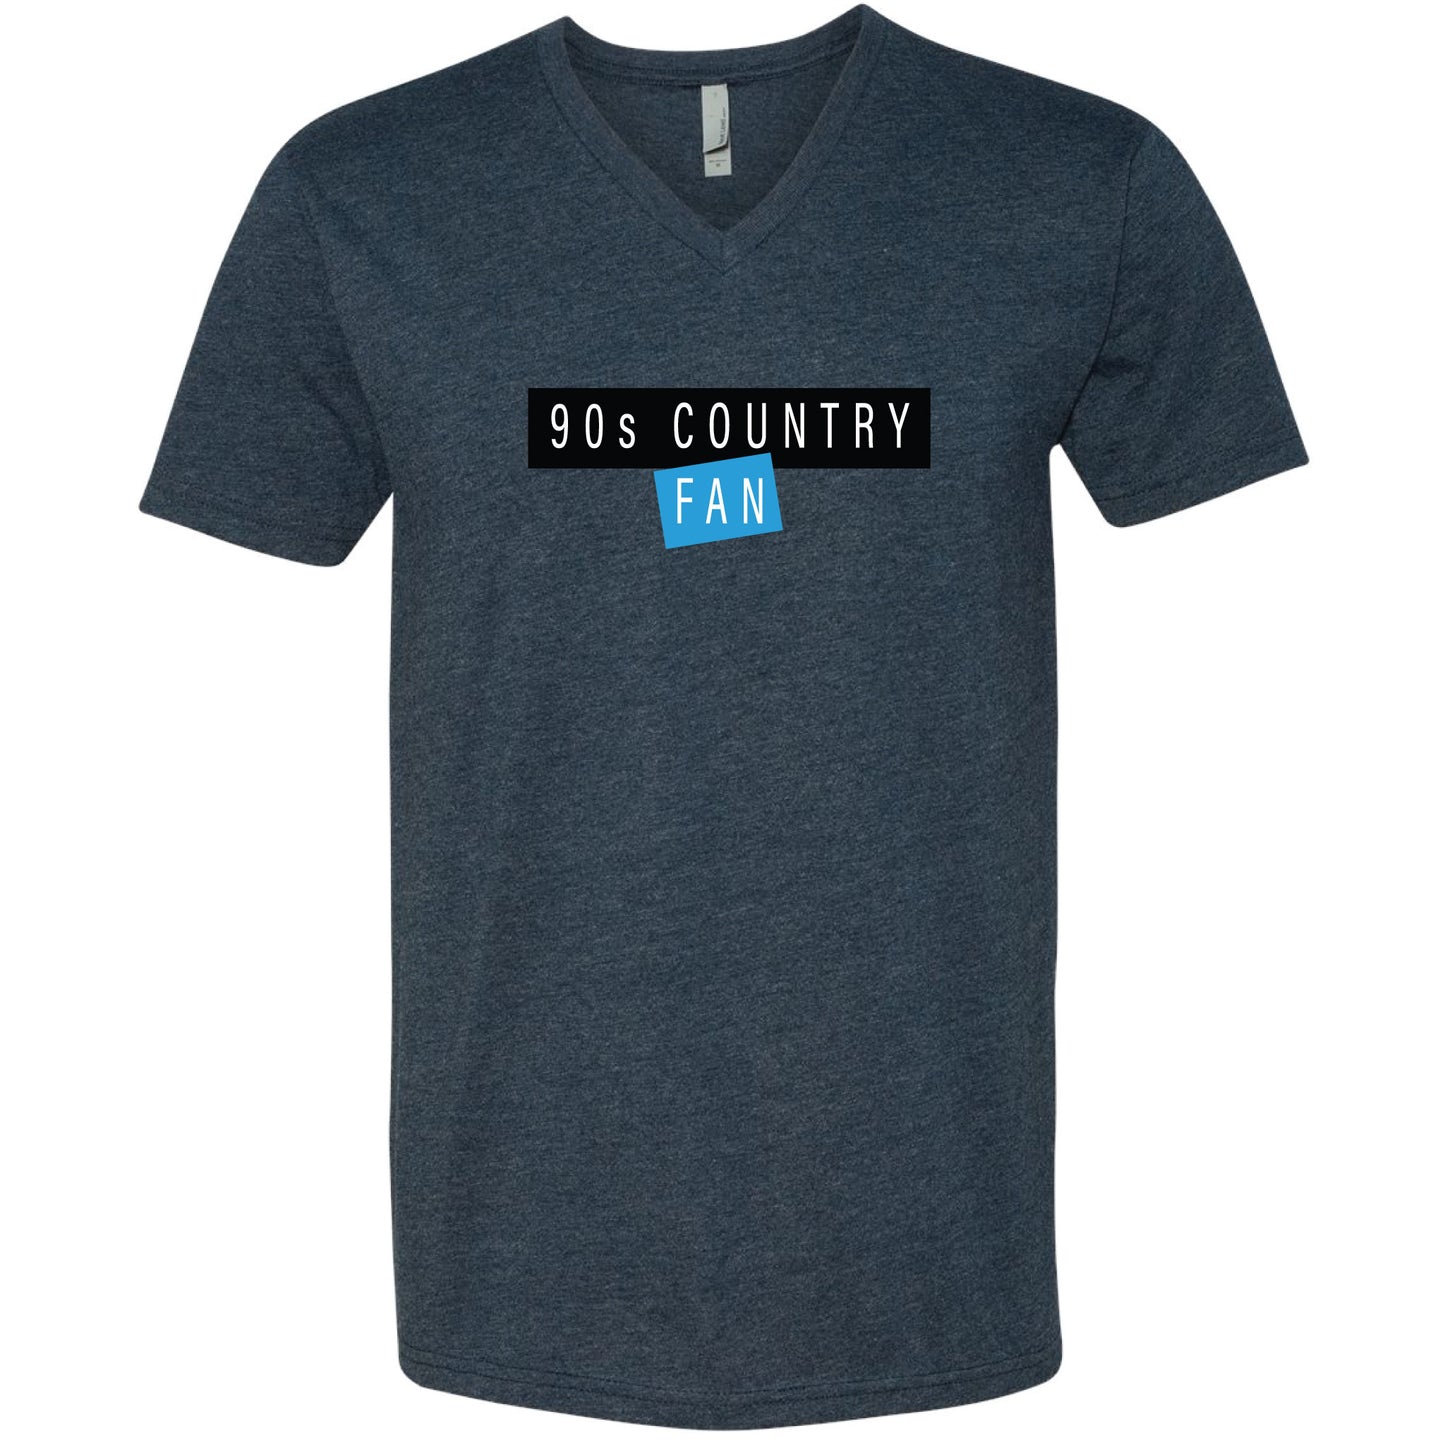 90s Country Fan V-Neck T-Shirt